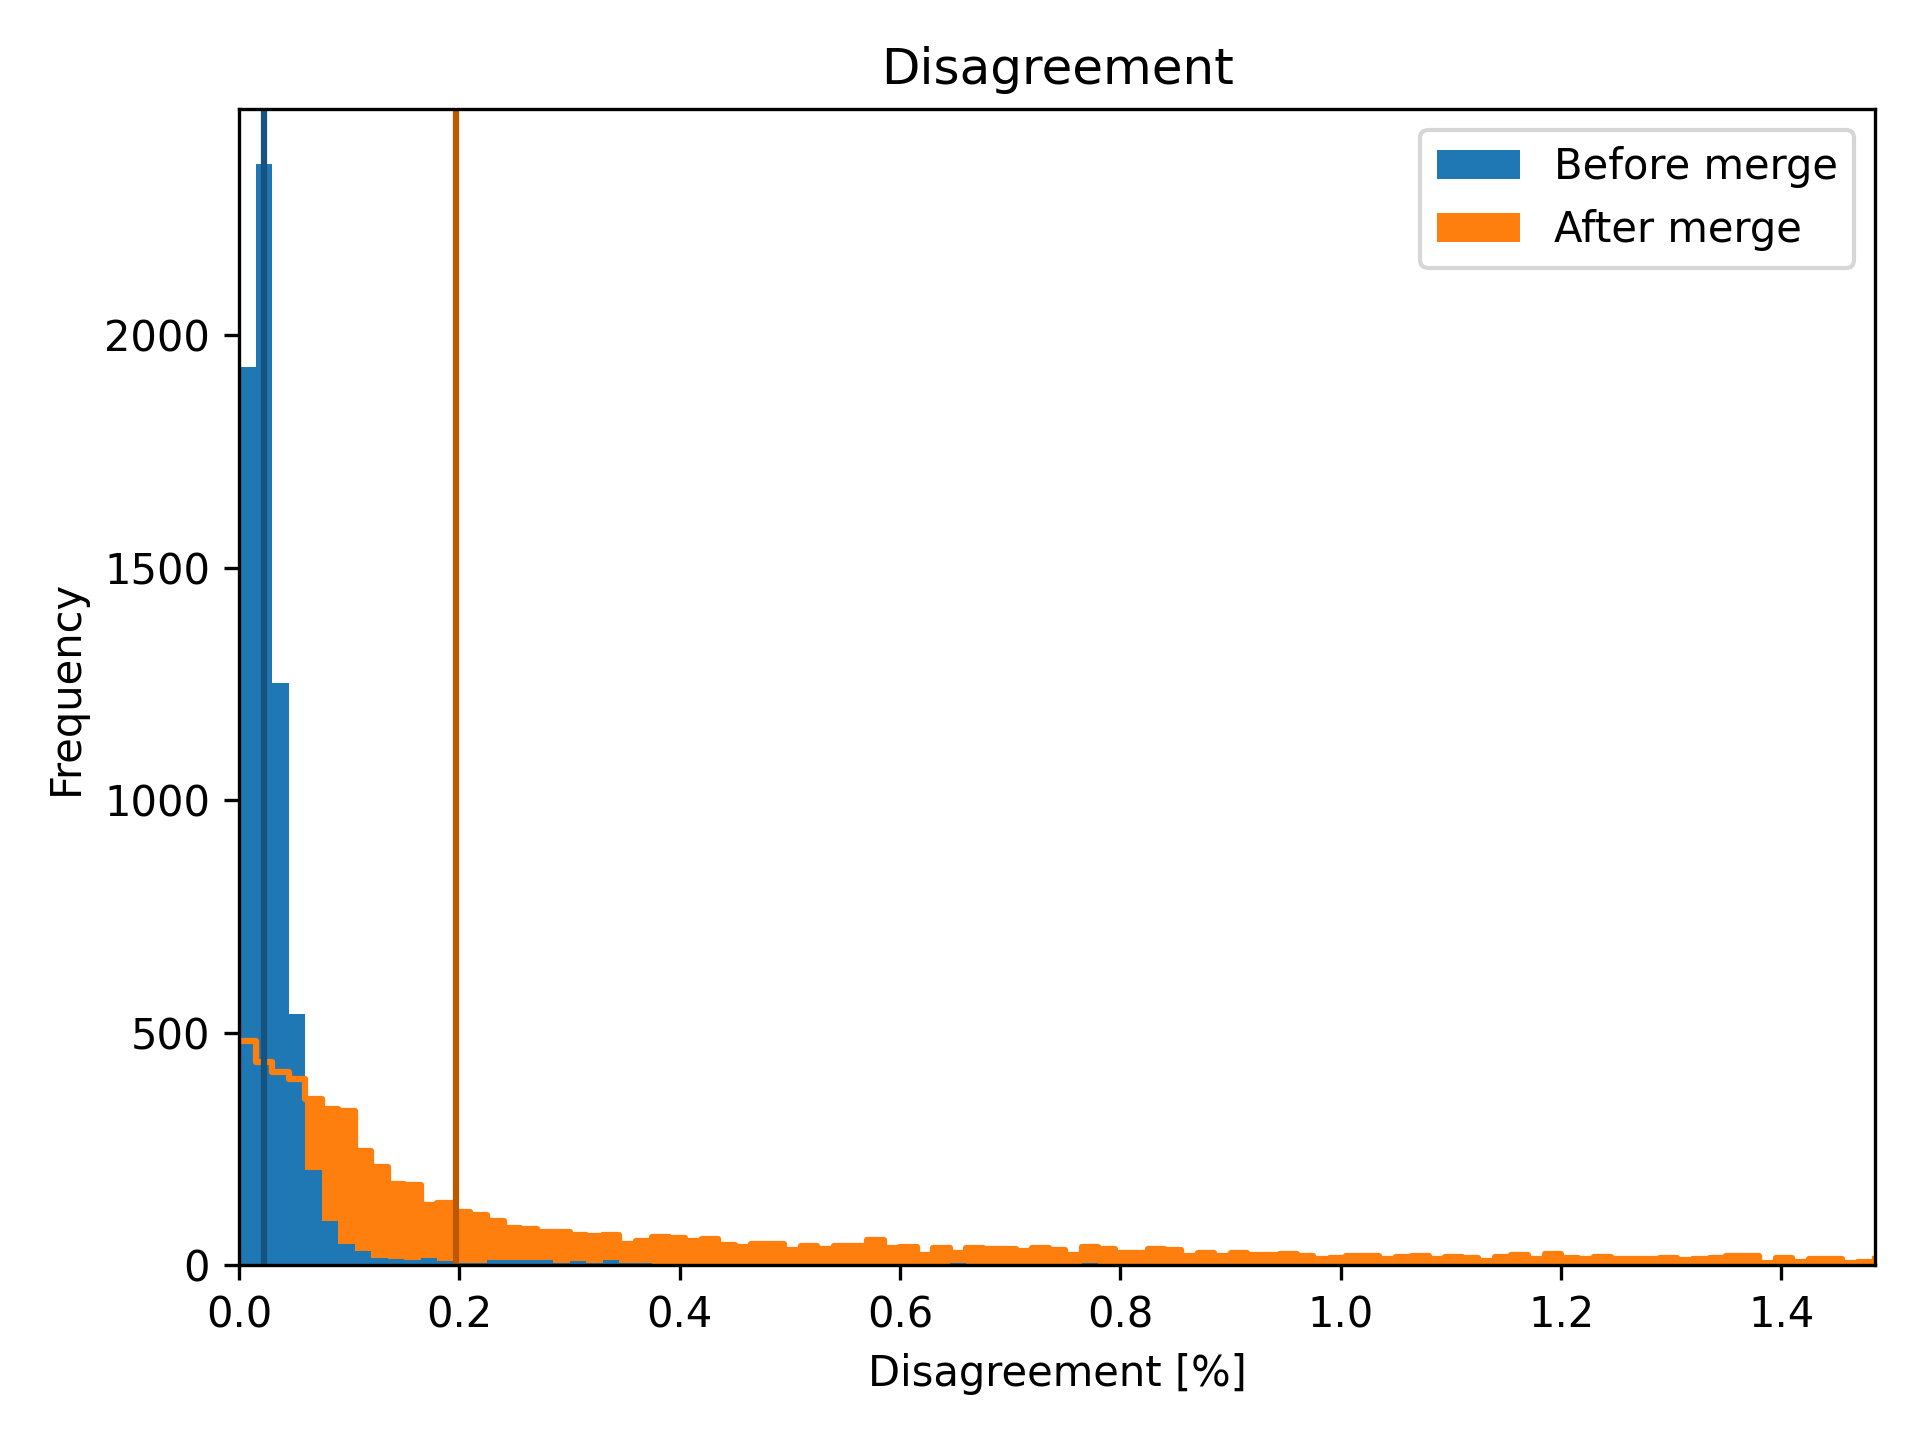 Weighted distributions of the disagreement before and after the merge with respective medians.